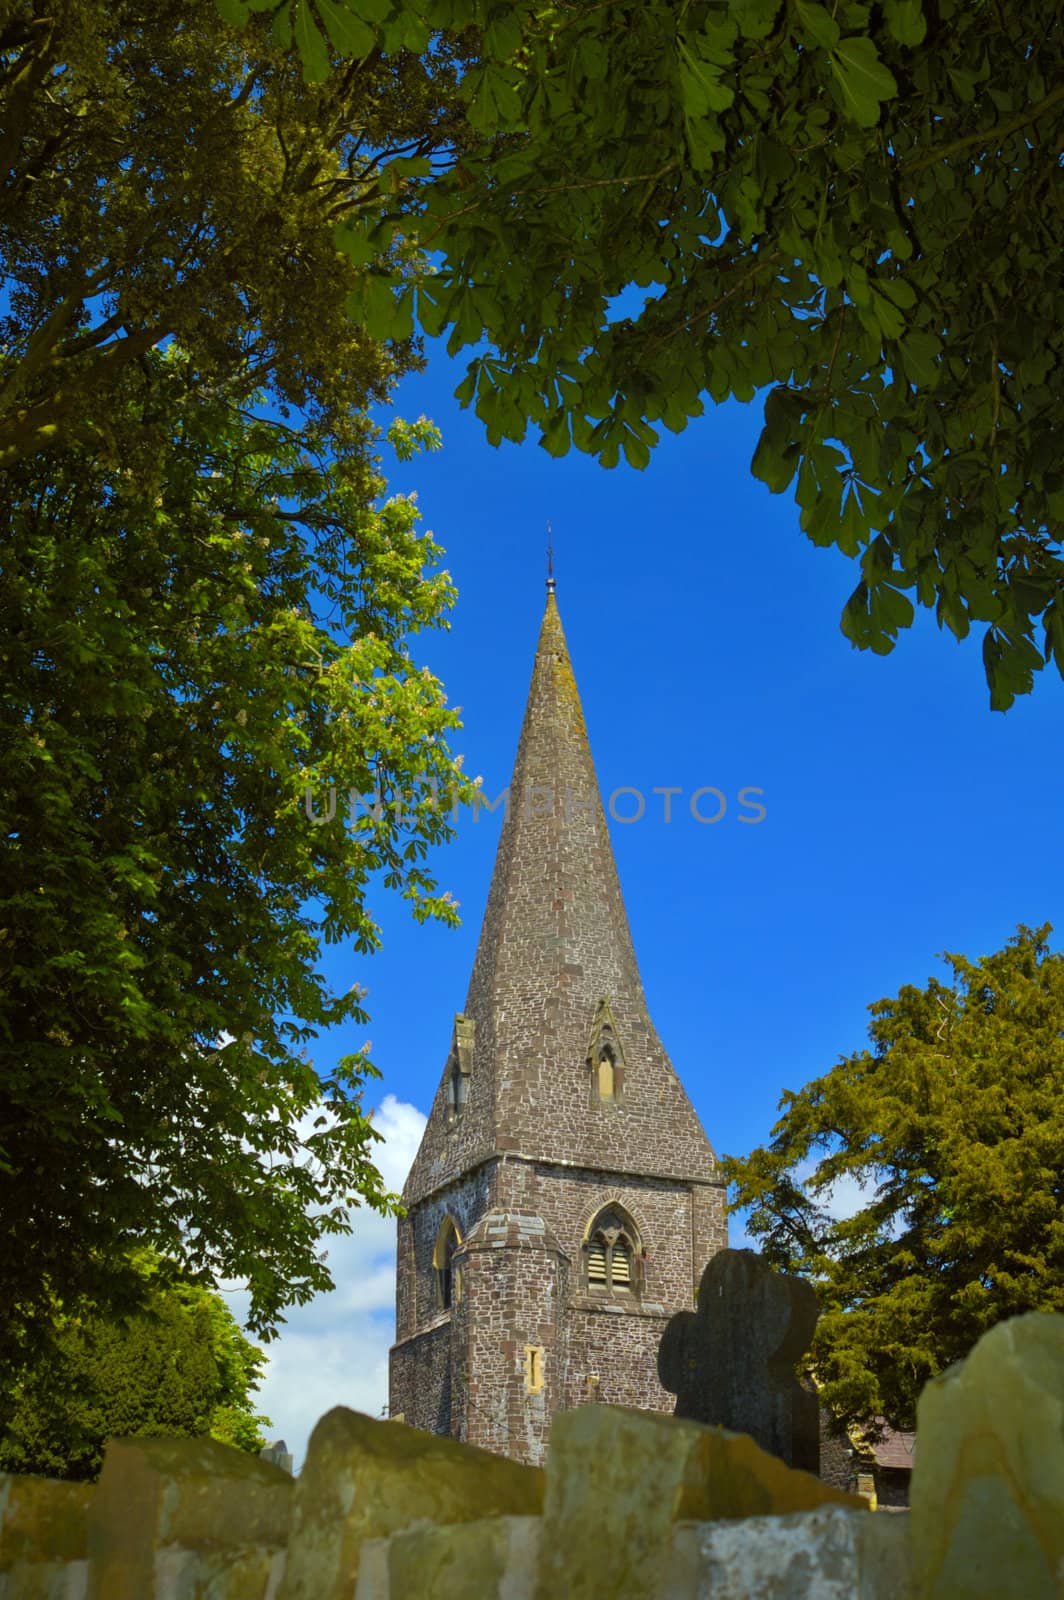 The stone spire of Llanddarog Church, Dyfed, Wales, UK. This imposing Norman church is situated on a hill. Its spire is a landmark for the village and can be seen for miles.